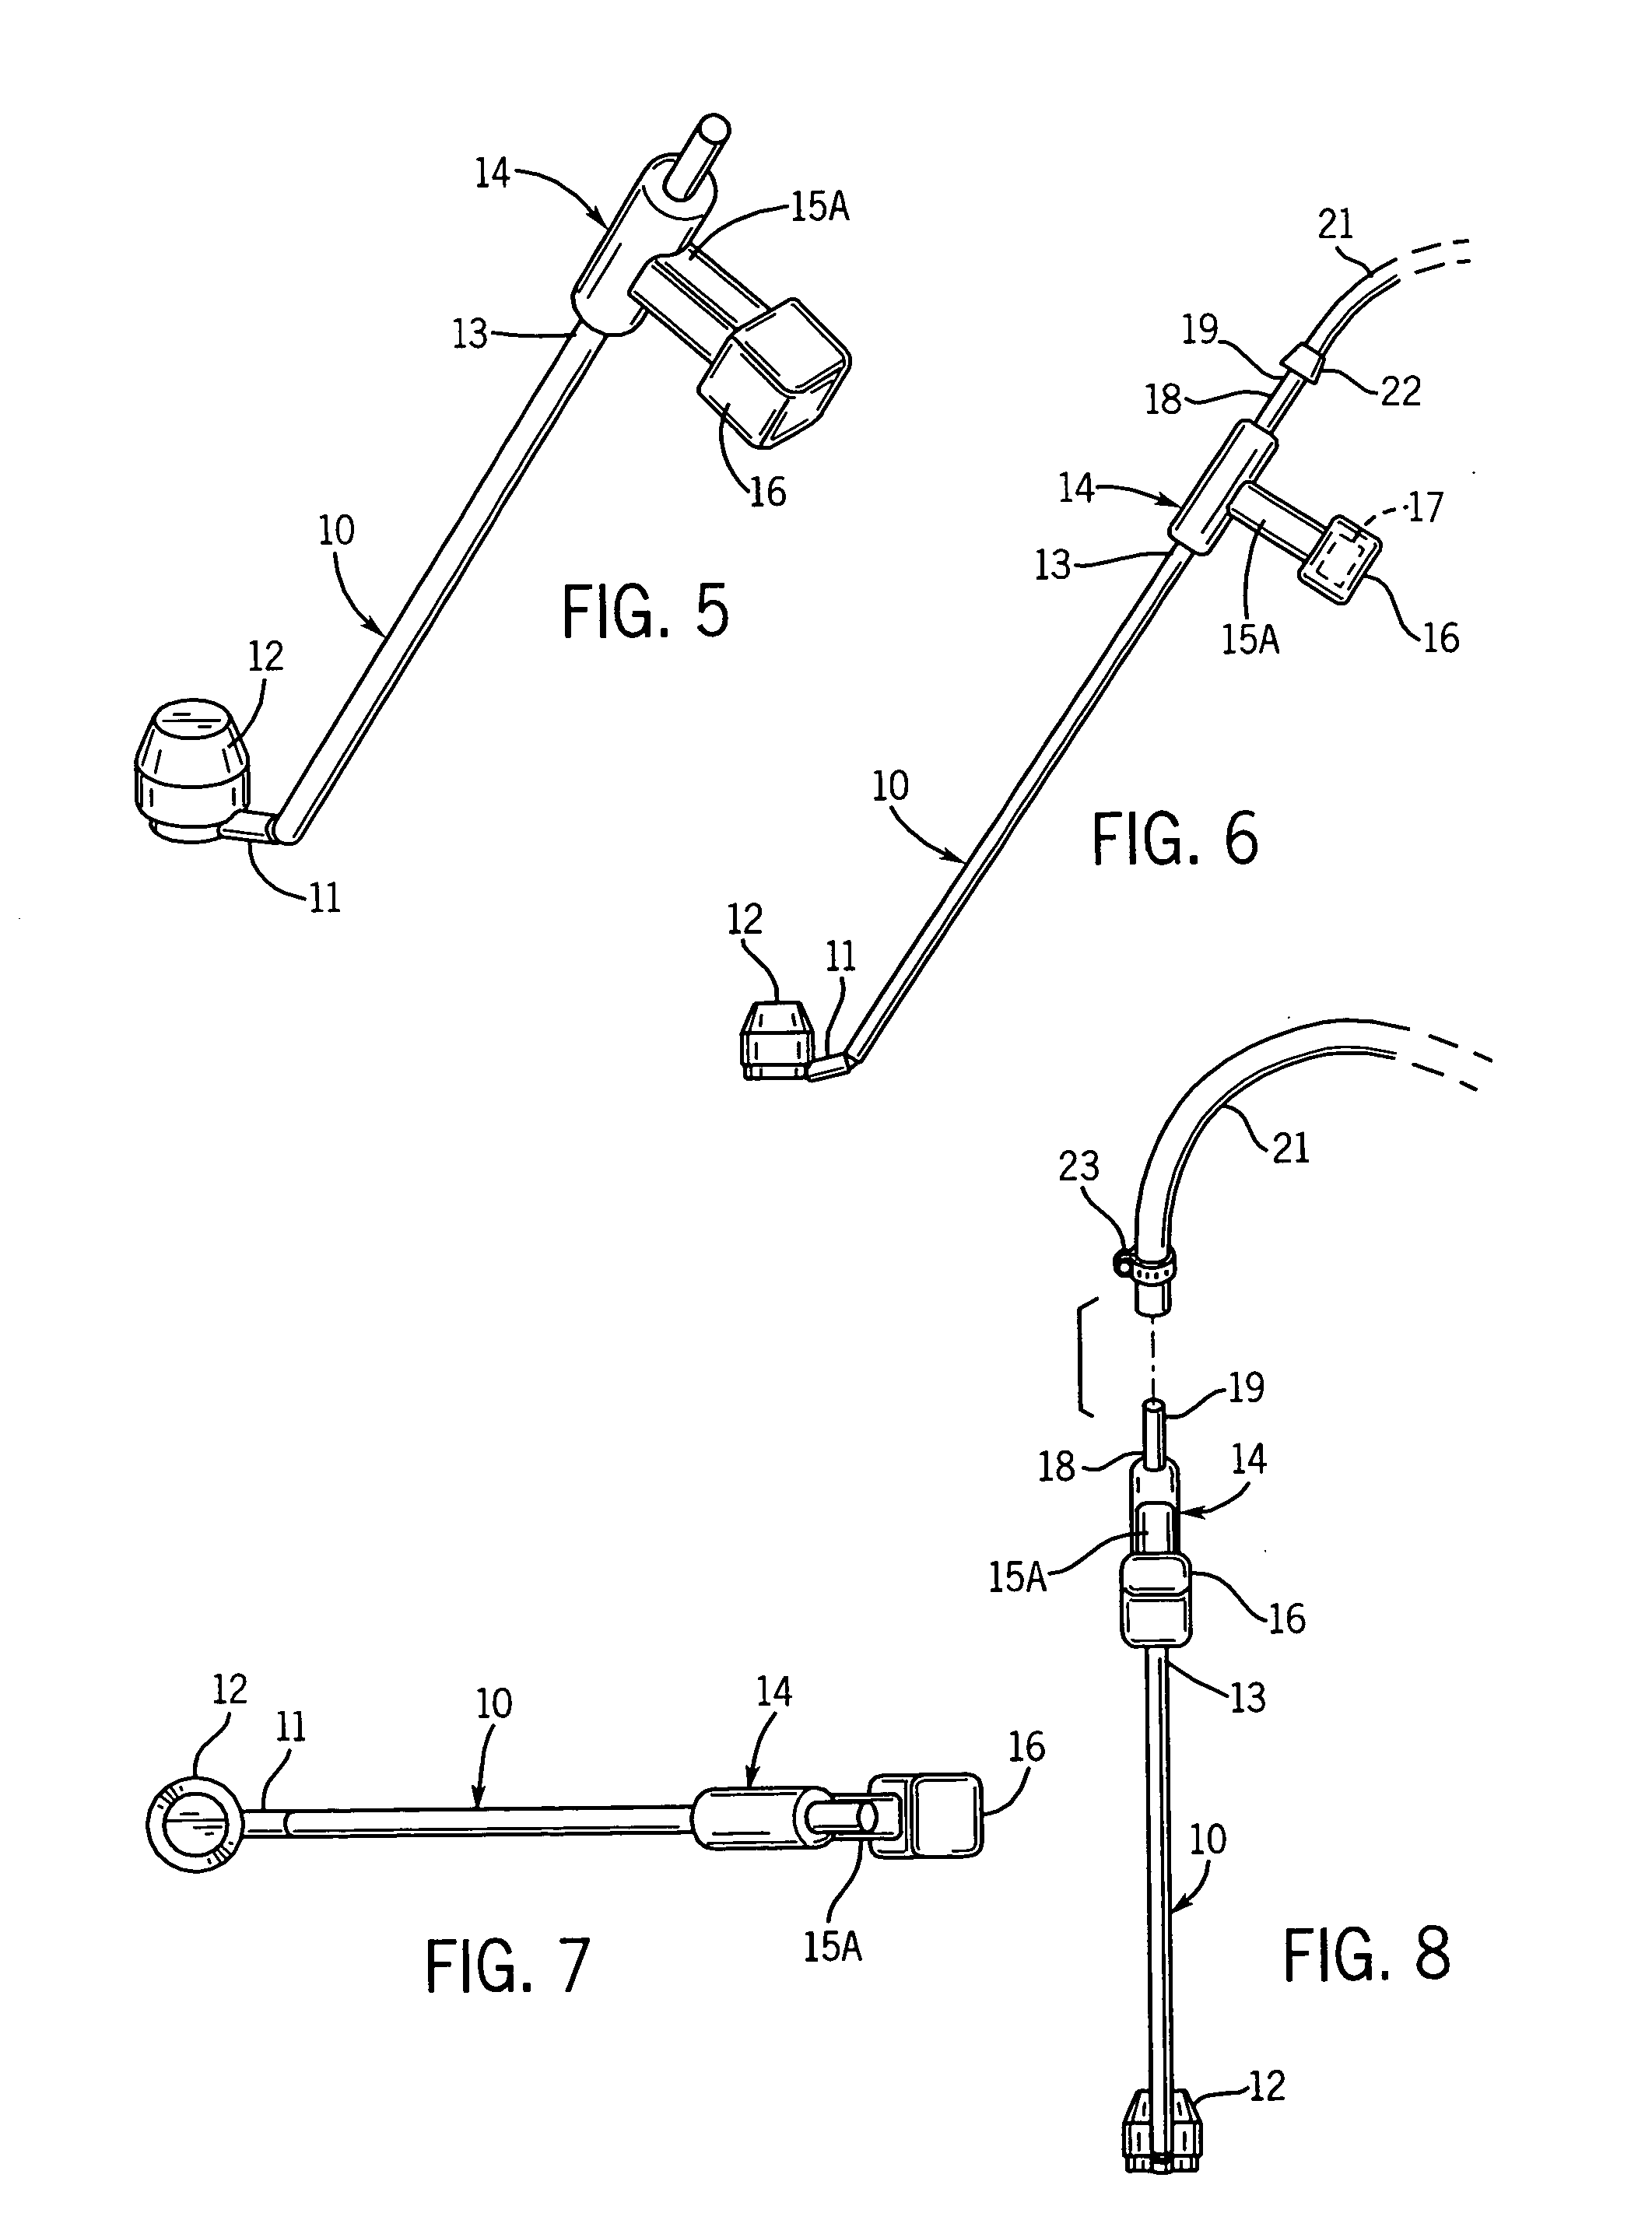 Manually portable electric bilge pump with a rechargeable battery